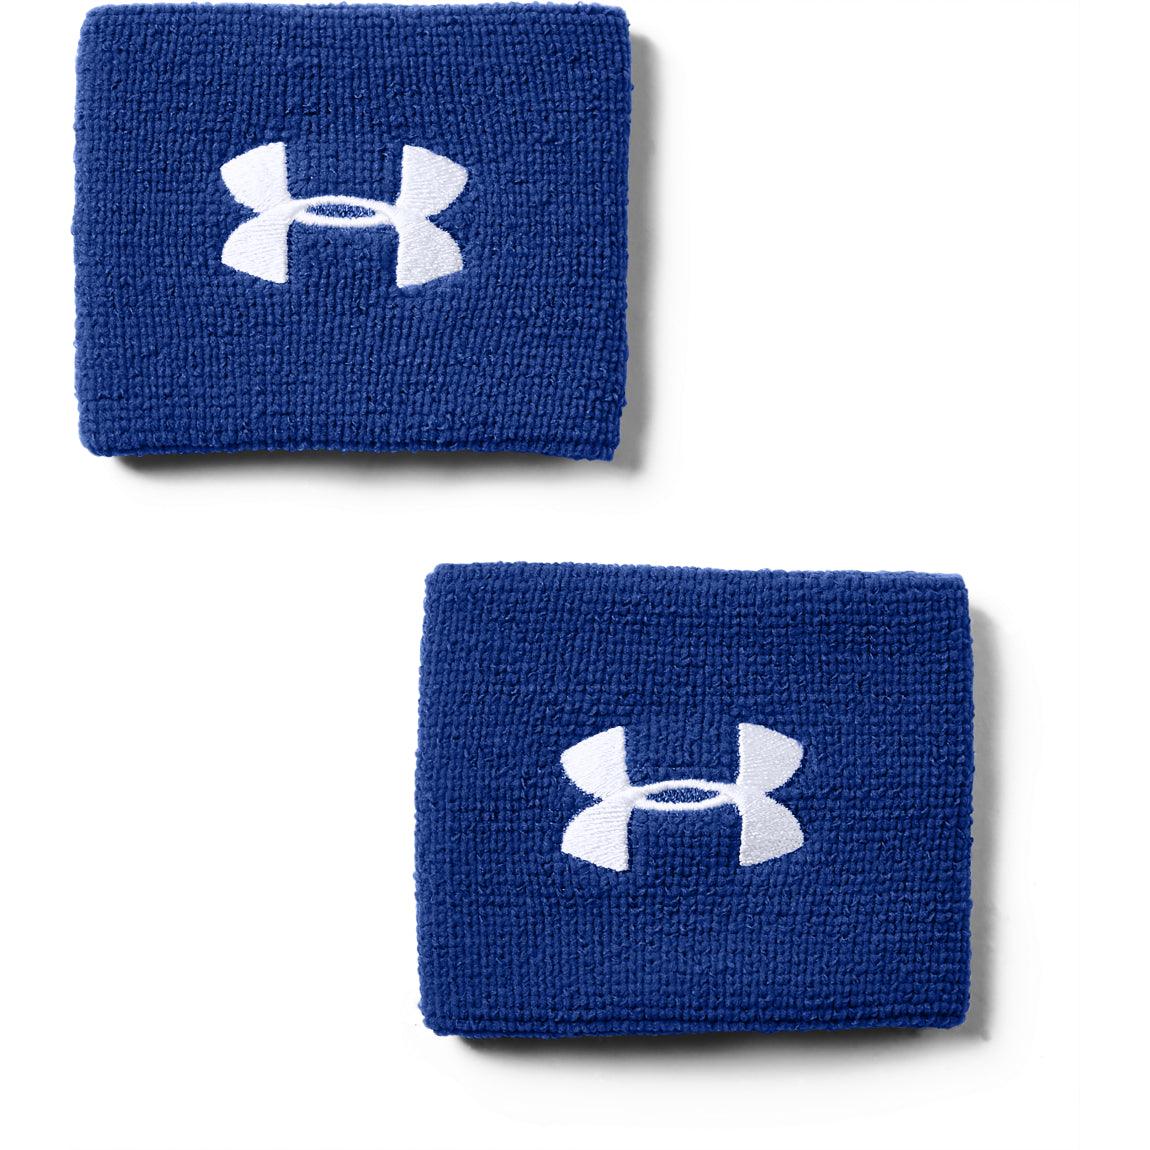 Under Armour 3 Performance Wristbands - Sports Excellence